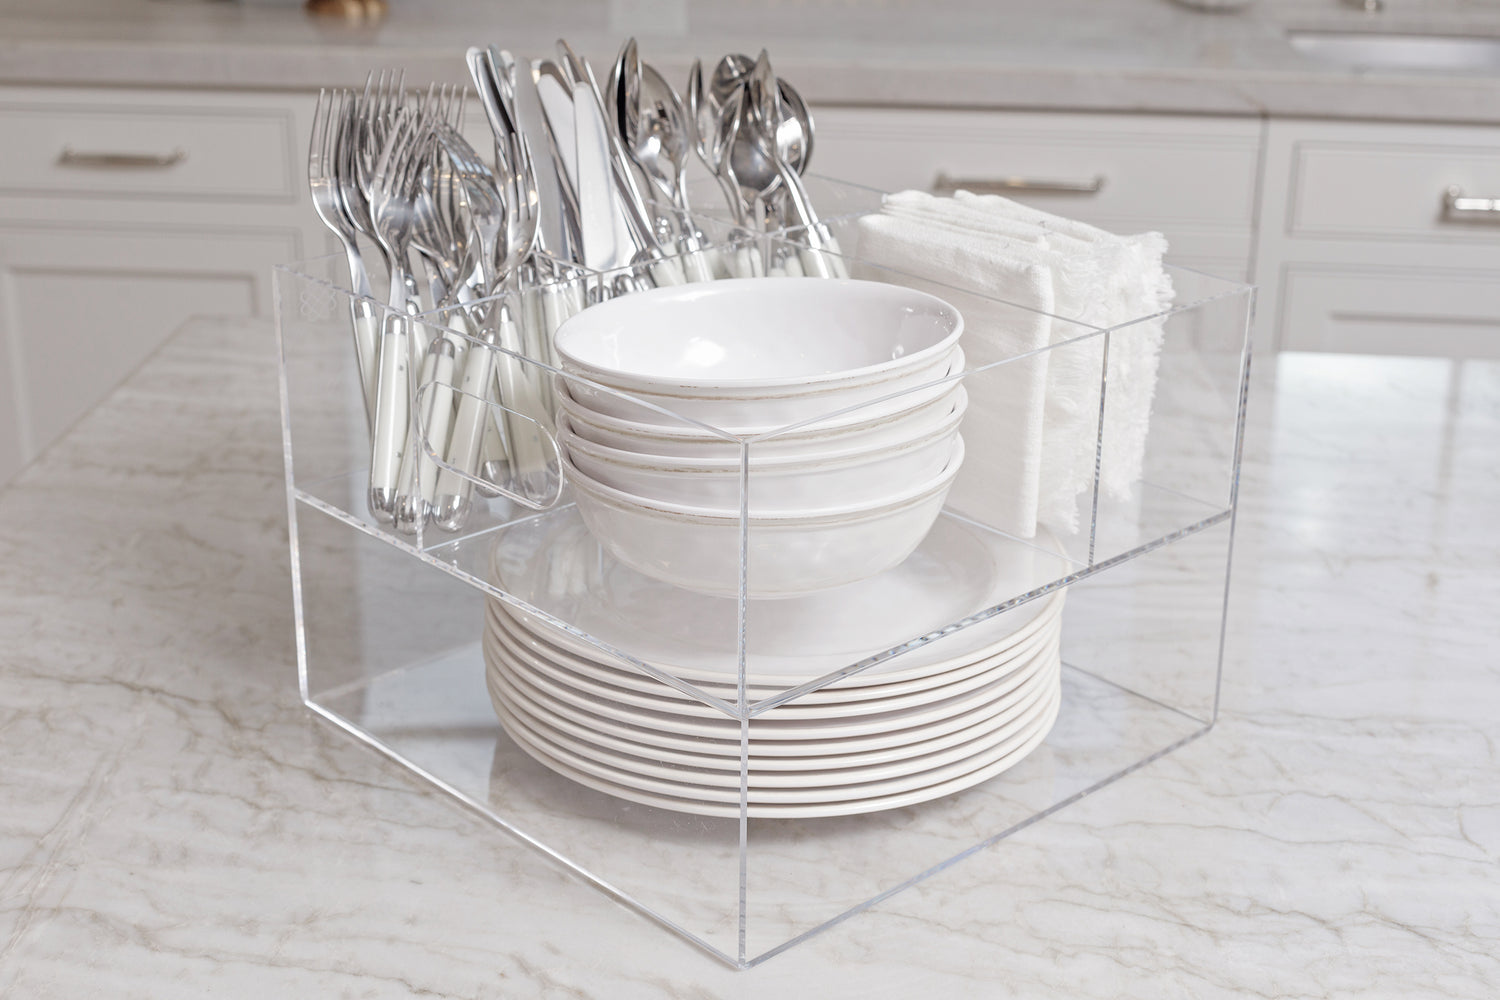 White dishes, silverware, and linen napkins stocked and ready to serve in the Acrylic Utensil Caddy.